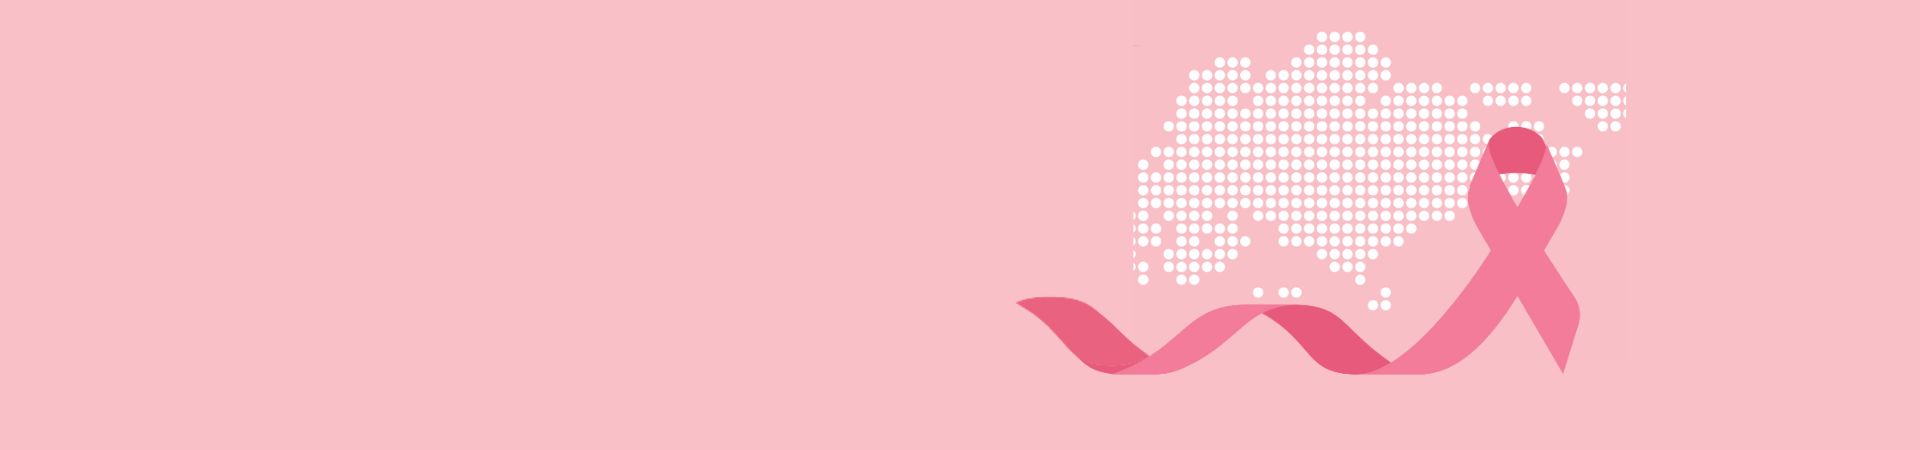 Early-breast cancer care in Singapore